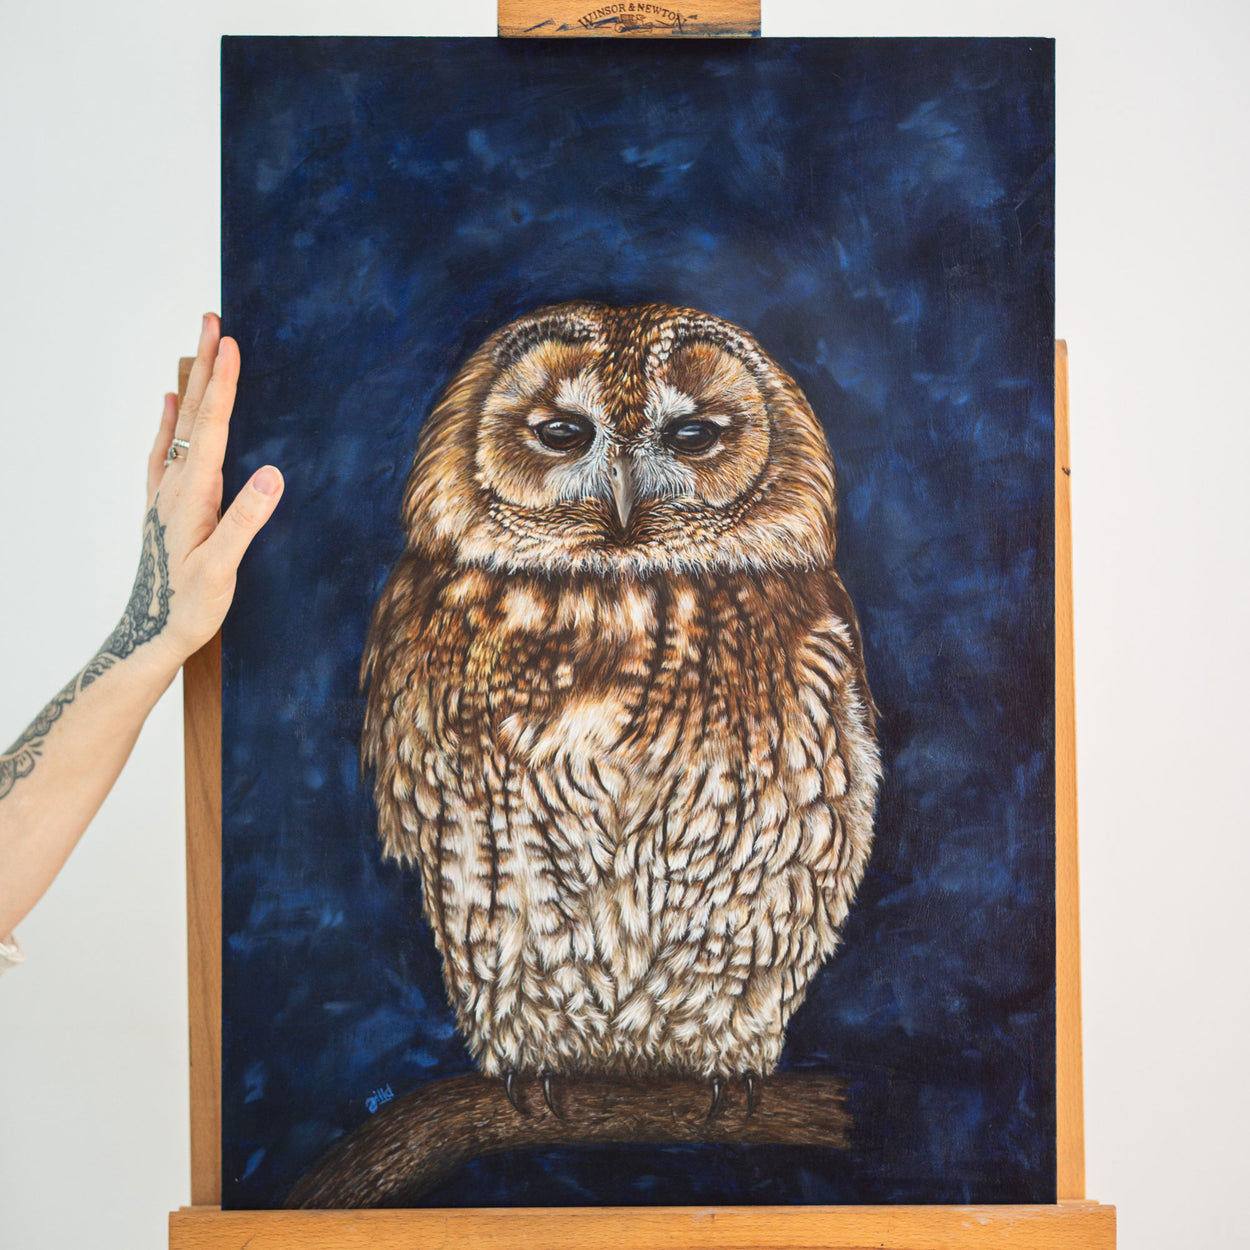 Tawny Owl Painting on Easel - Jill Dimond TheThrivingWild